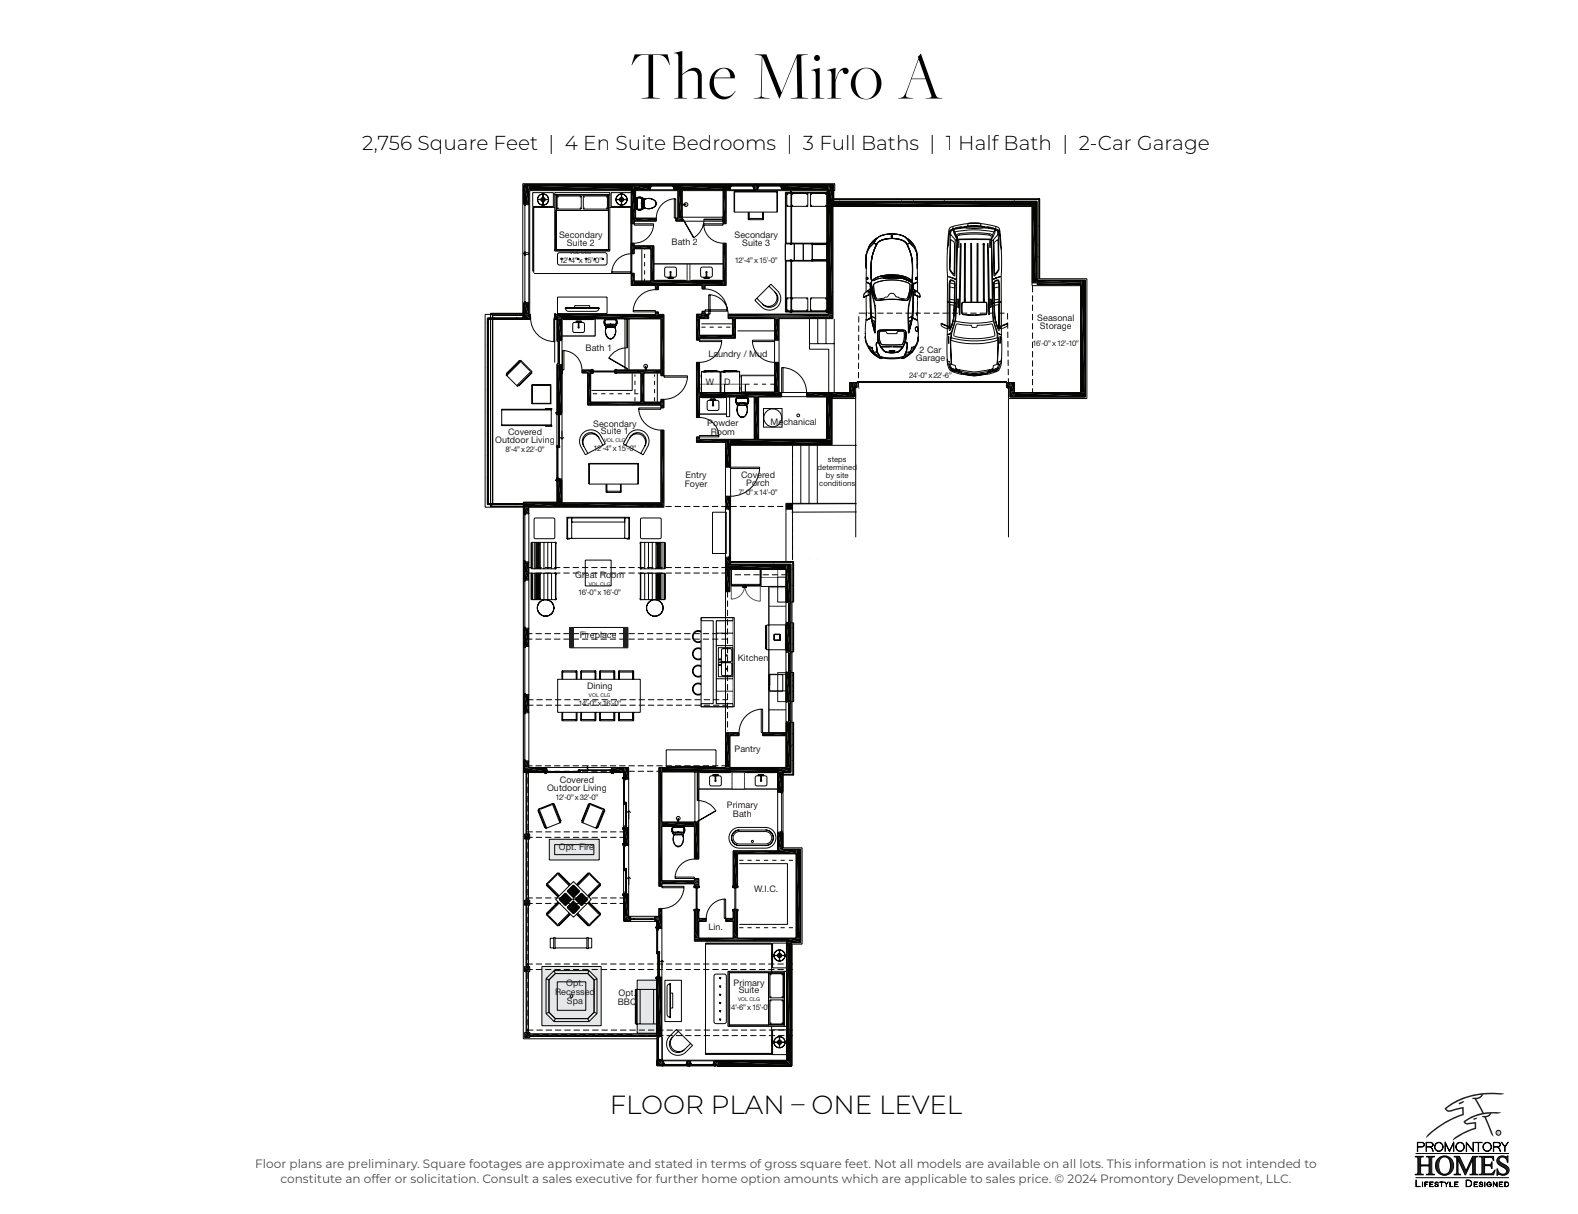 Promontory homes - The Miro A